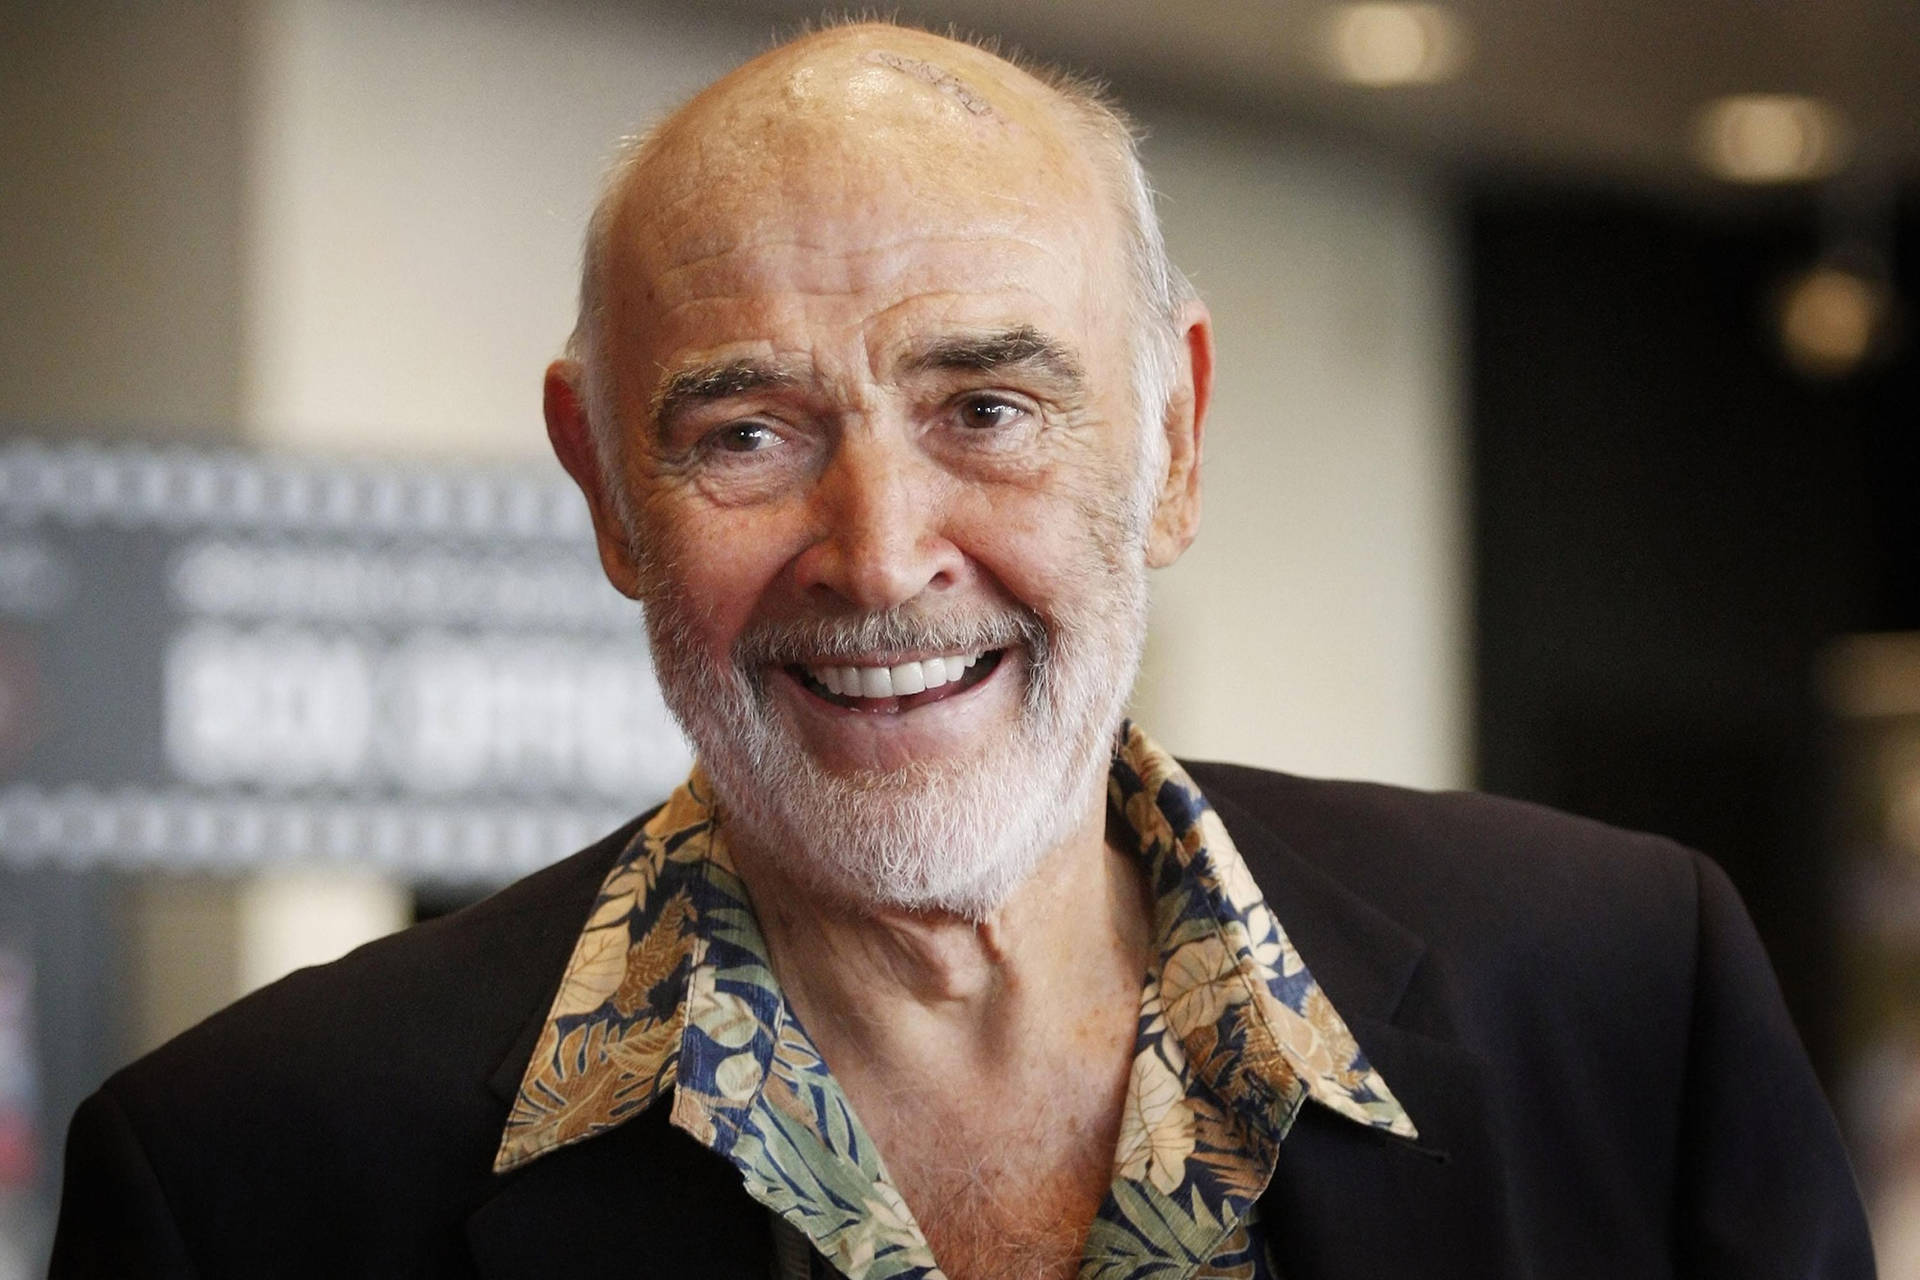 Smiling Actor Sean Connery